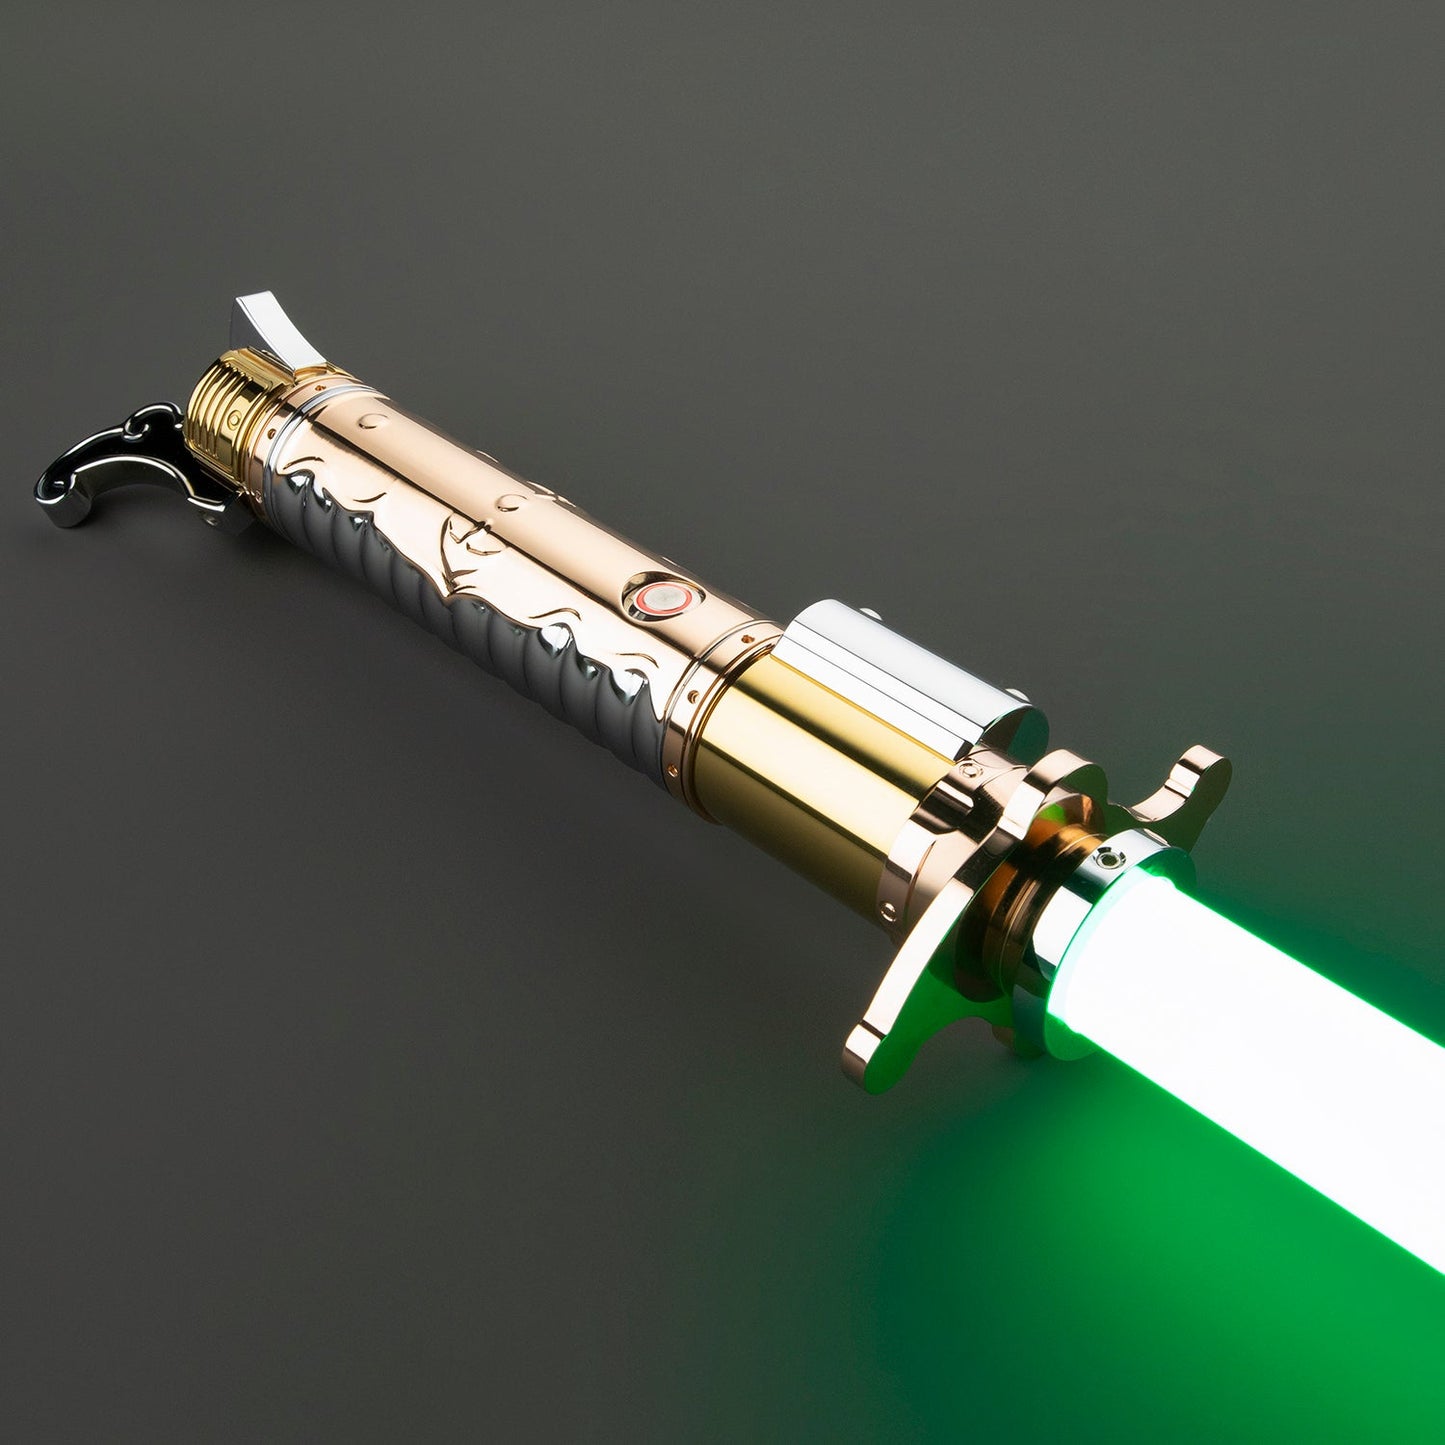 Custom THE CLAW Saber by LGT Sabers